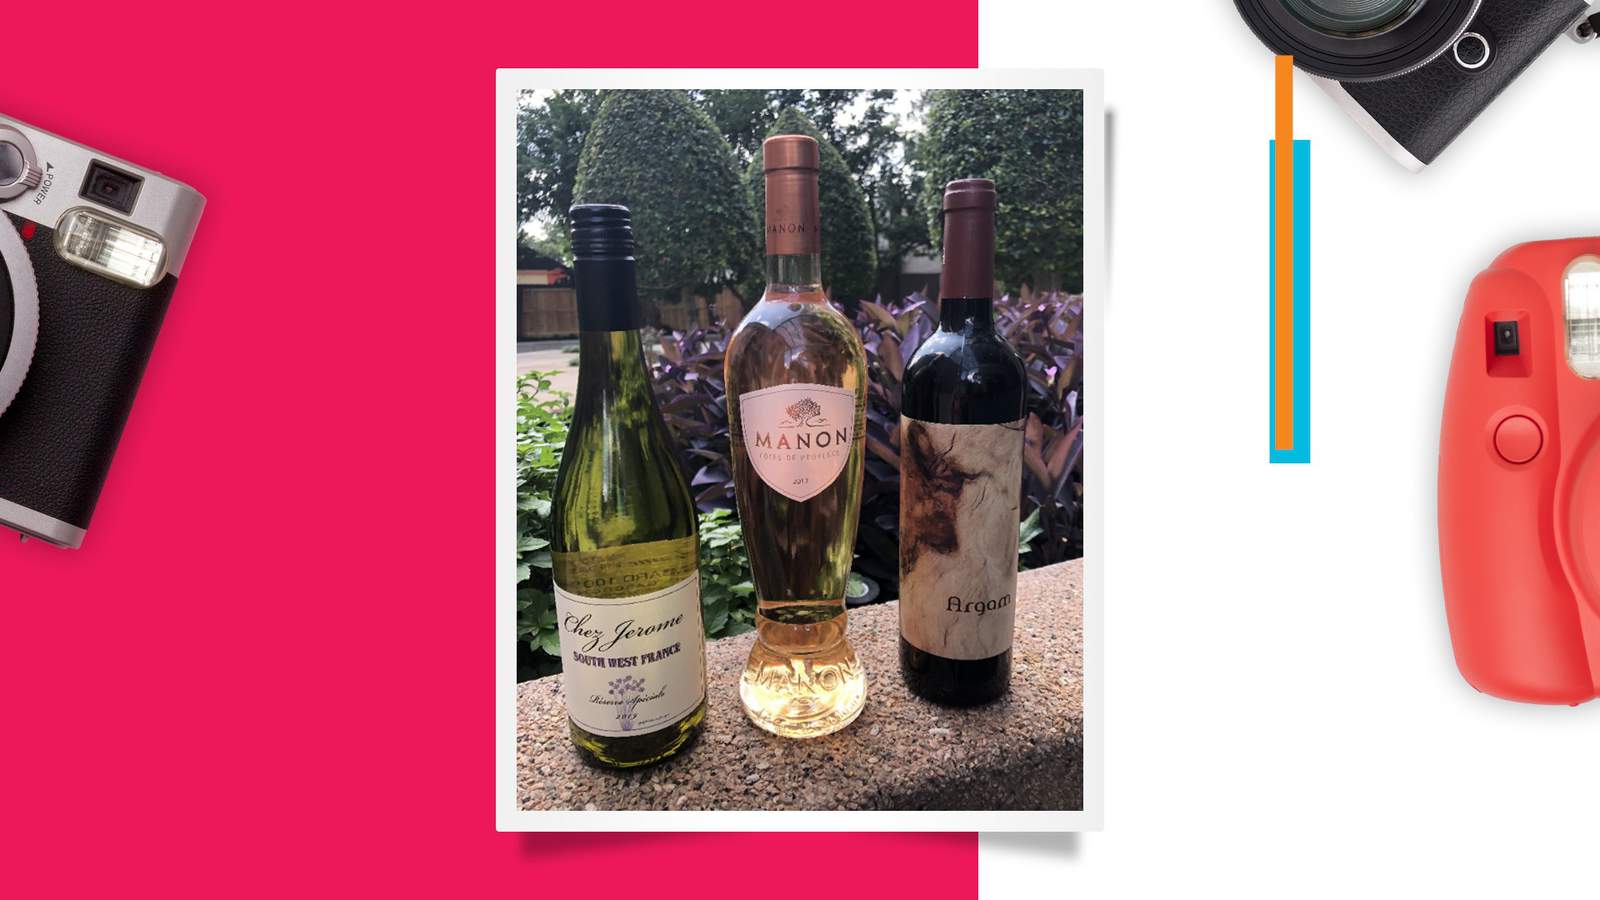 HL Wine Club: 3 must-try wines to help you transition into fall